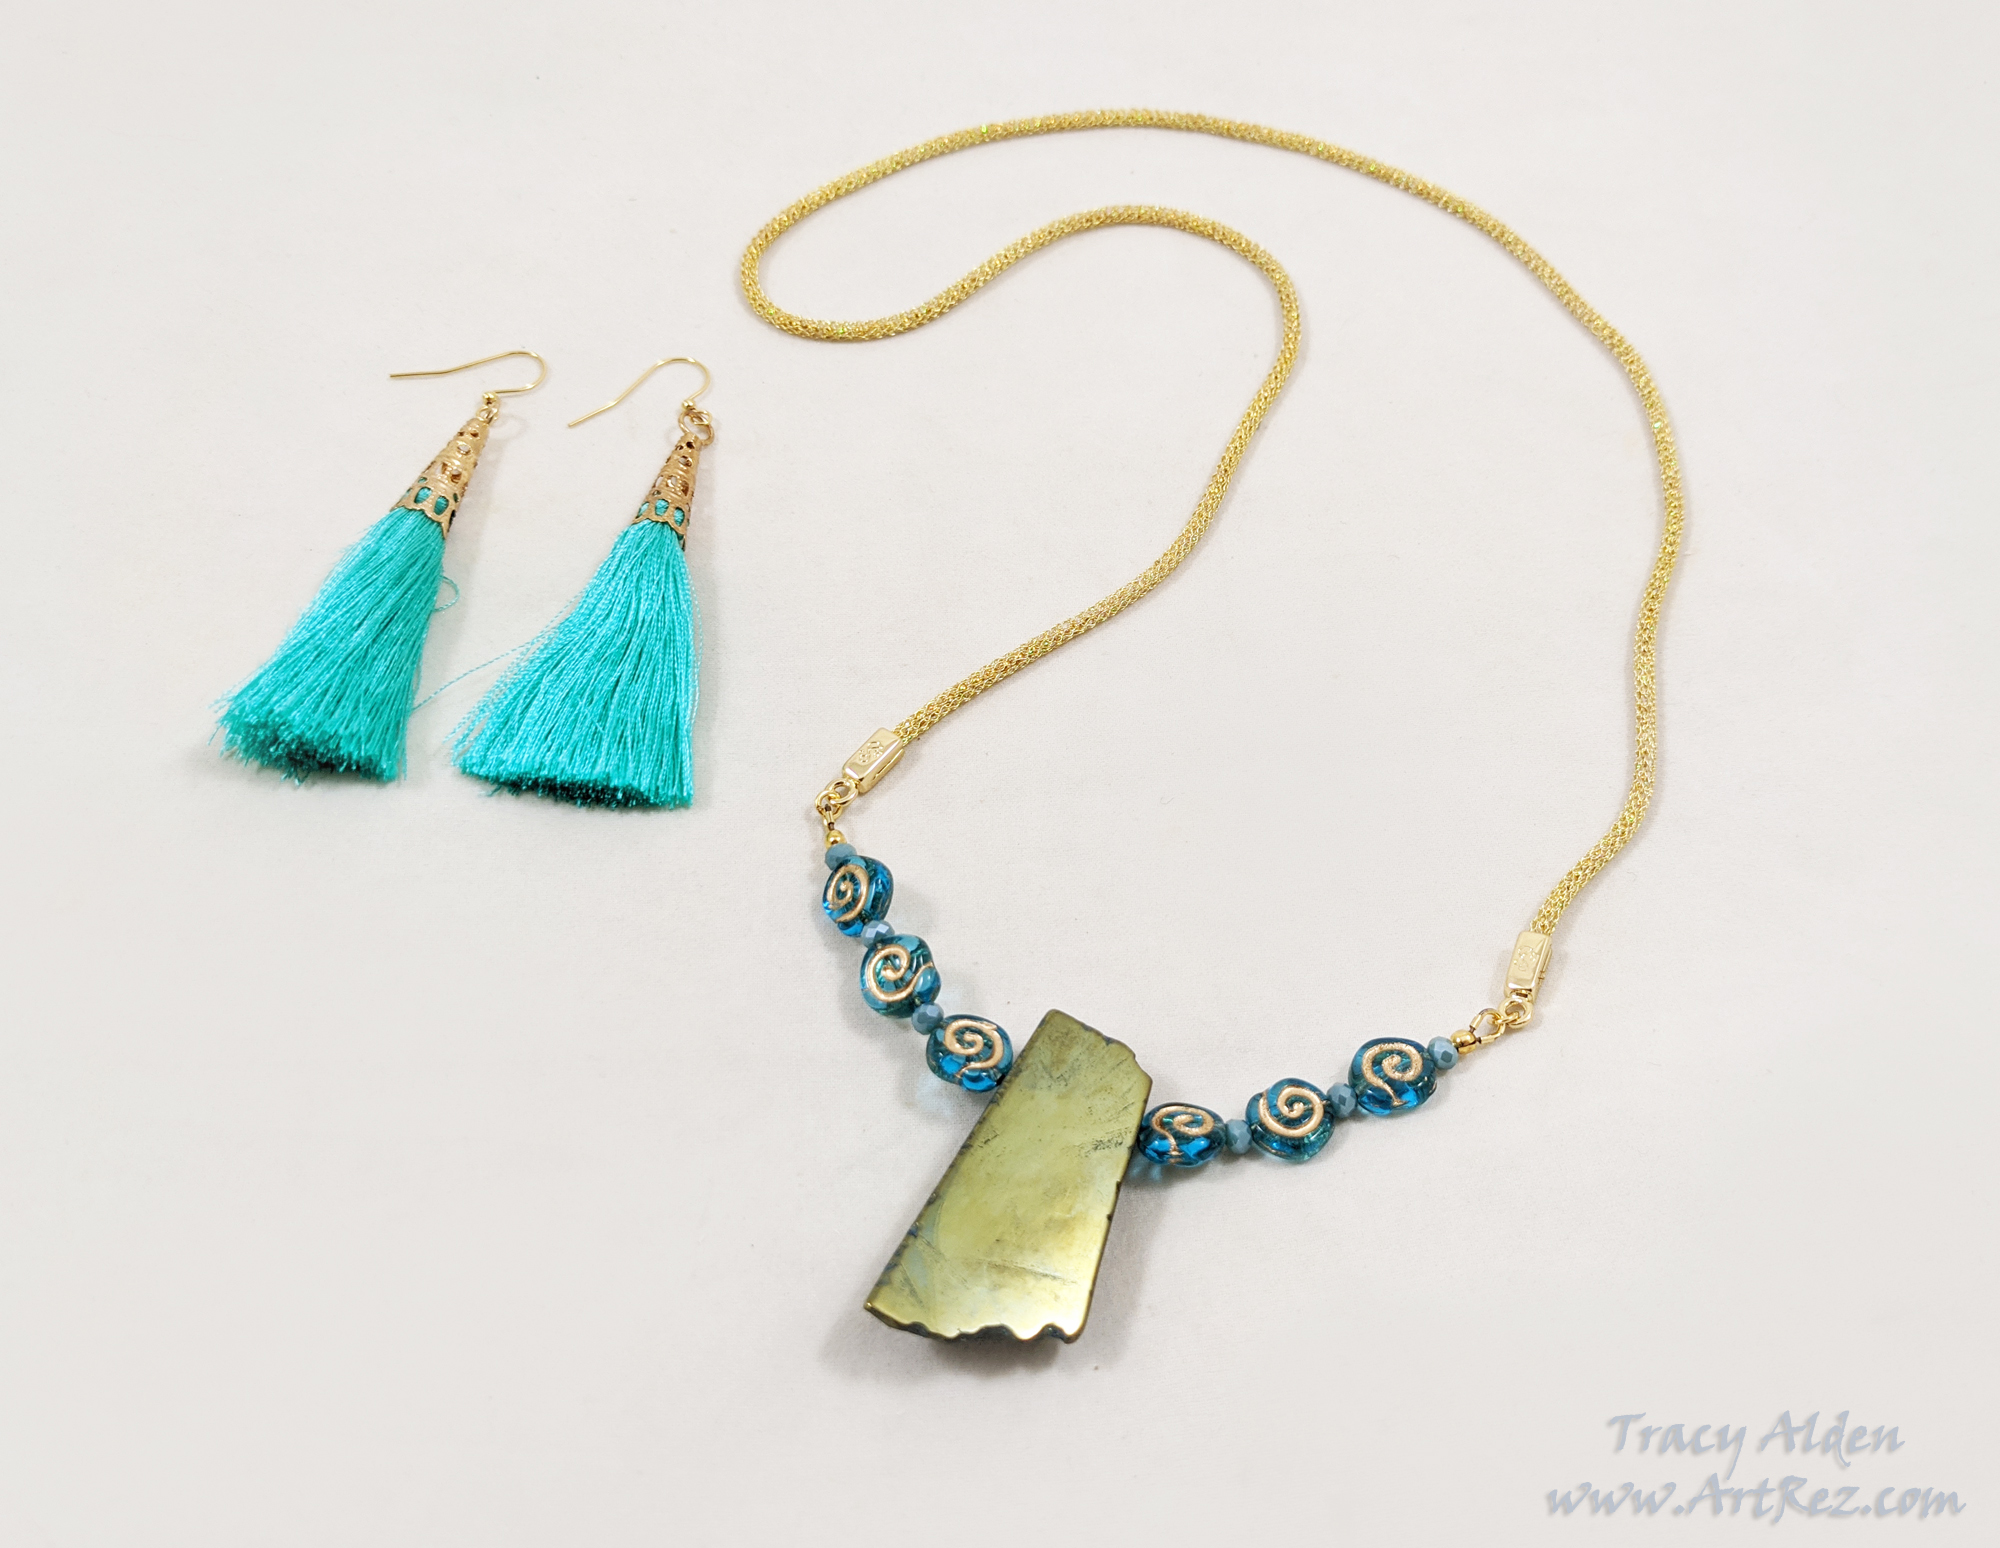 A teal and gold necklace set using supplies from SilverSilk